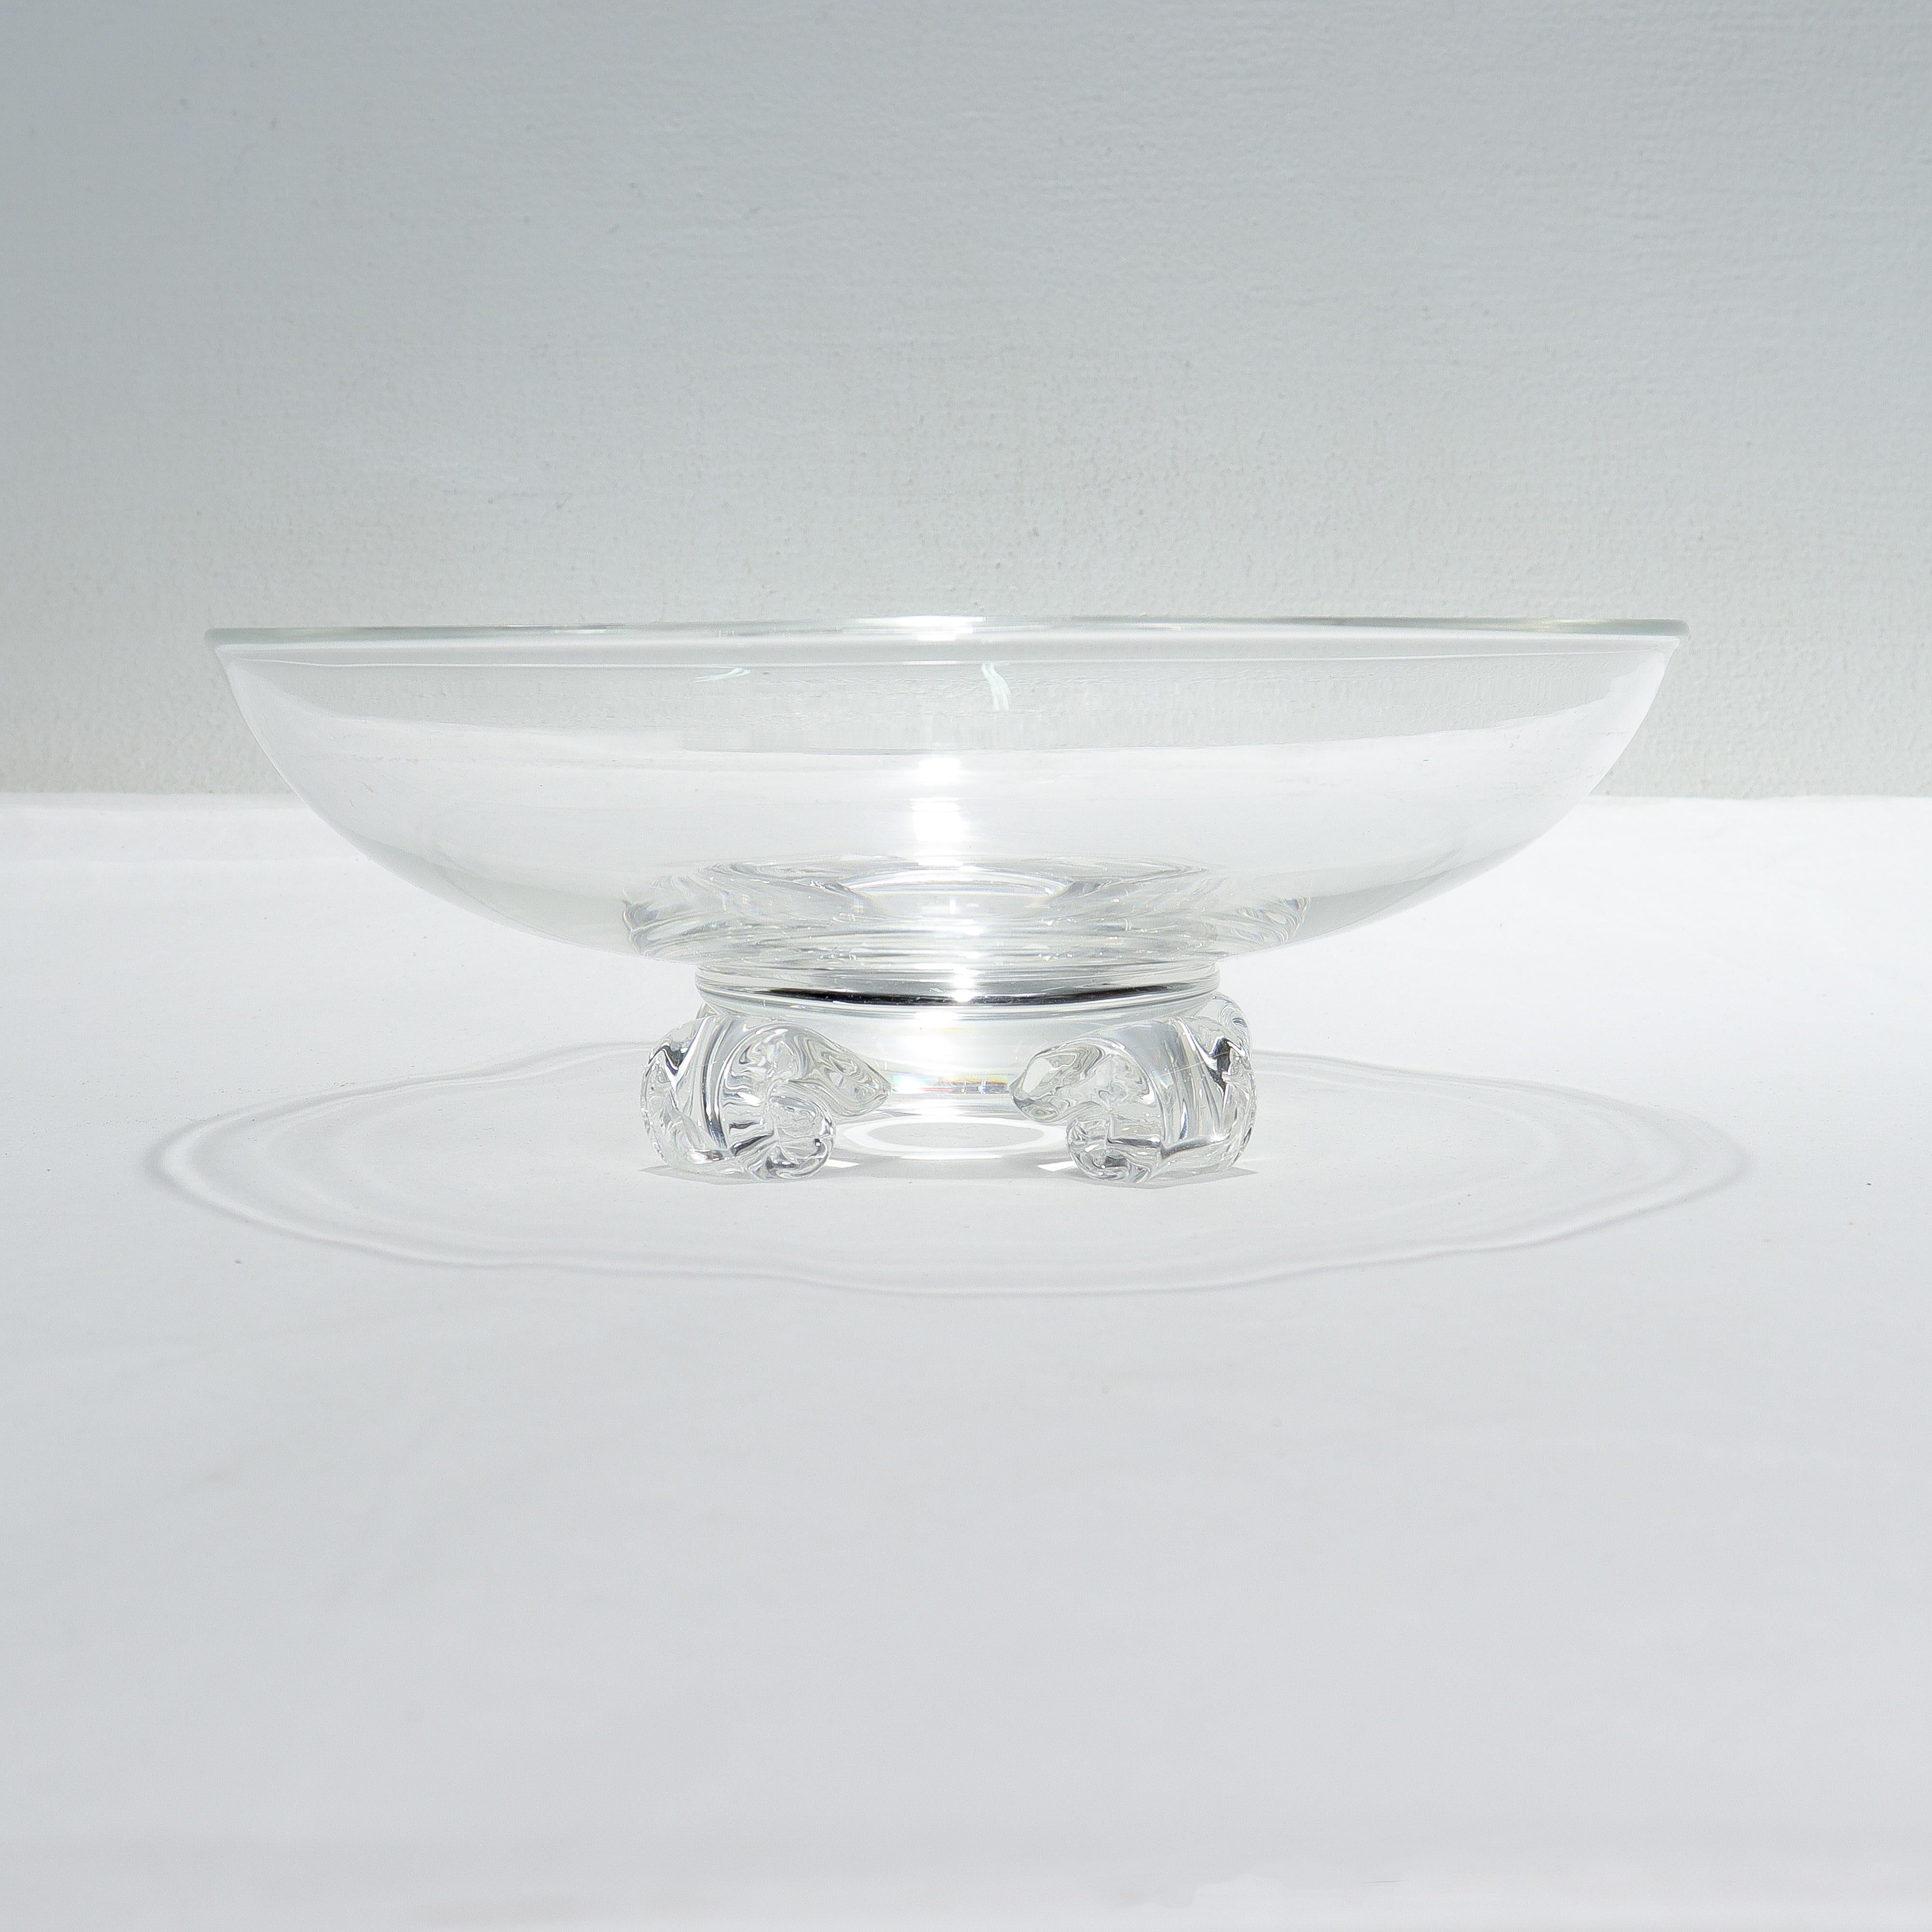 American Mid-Century Modern Steuben Scroll Footed Art Glass Bowl Model No. 7907 For Sale